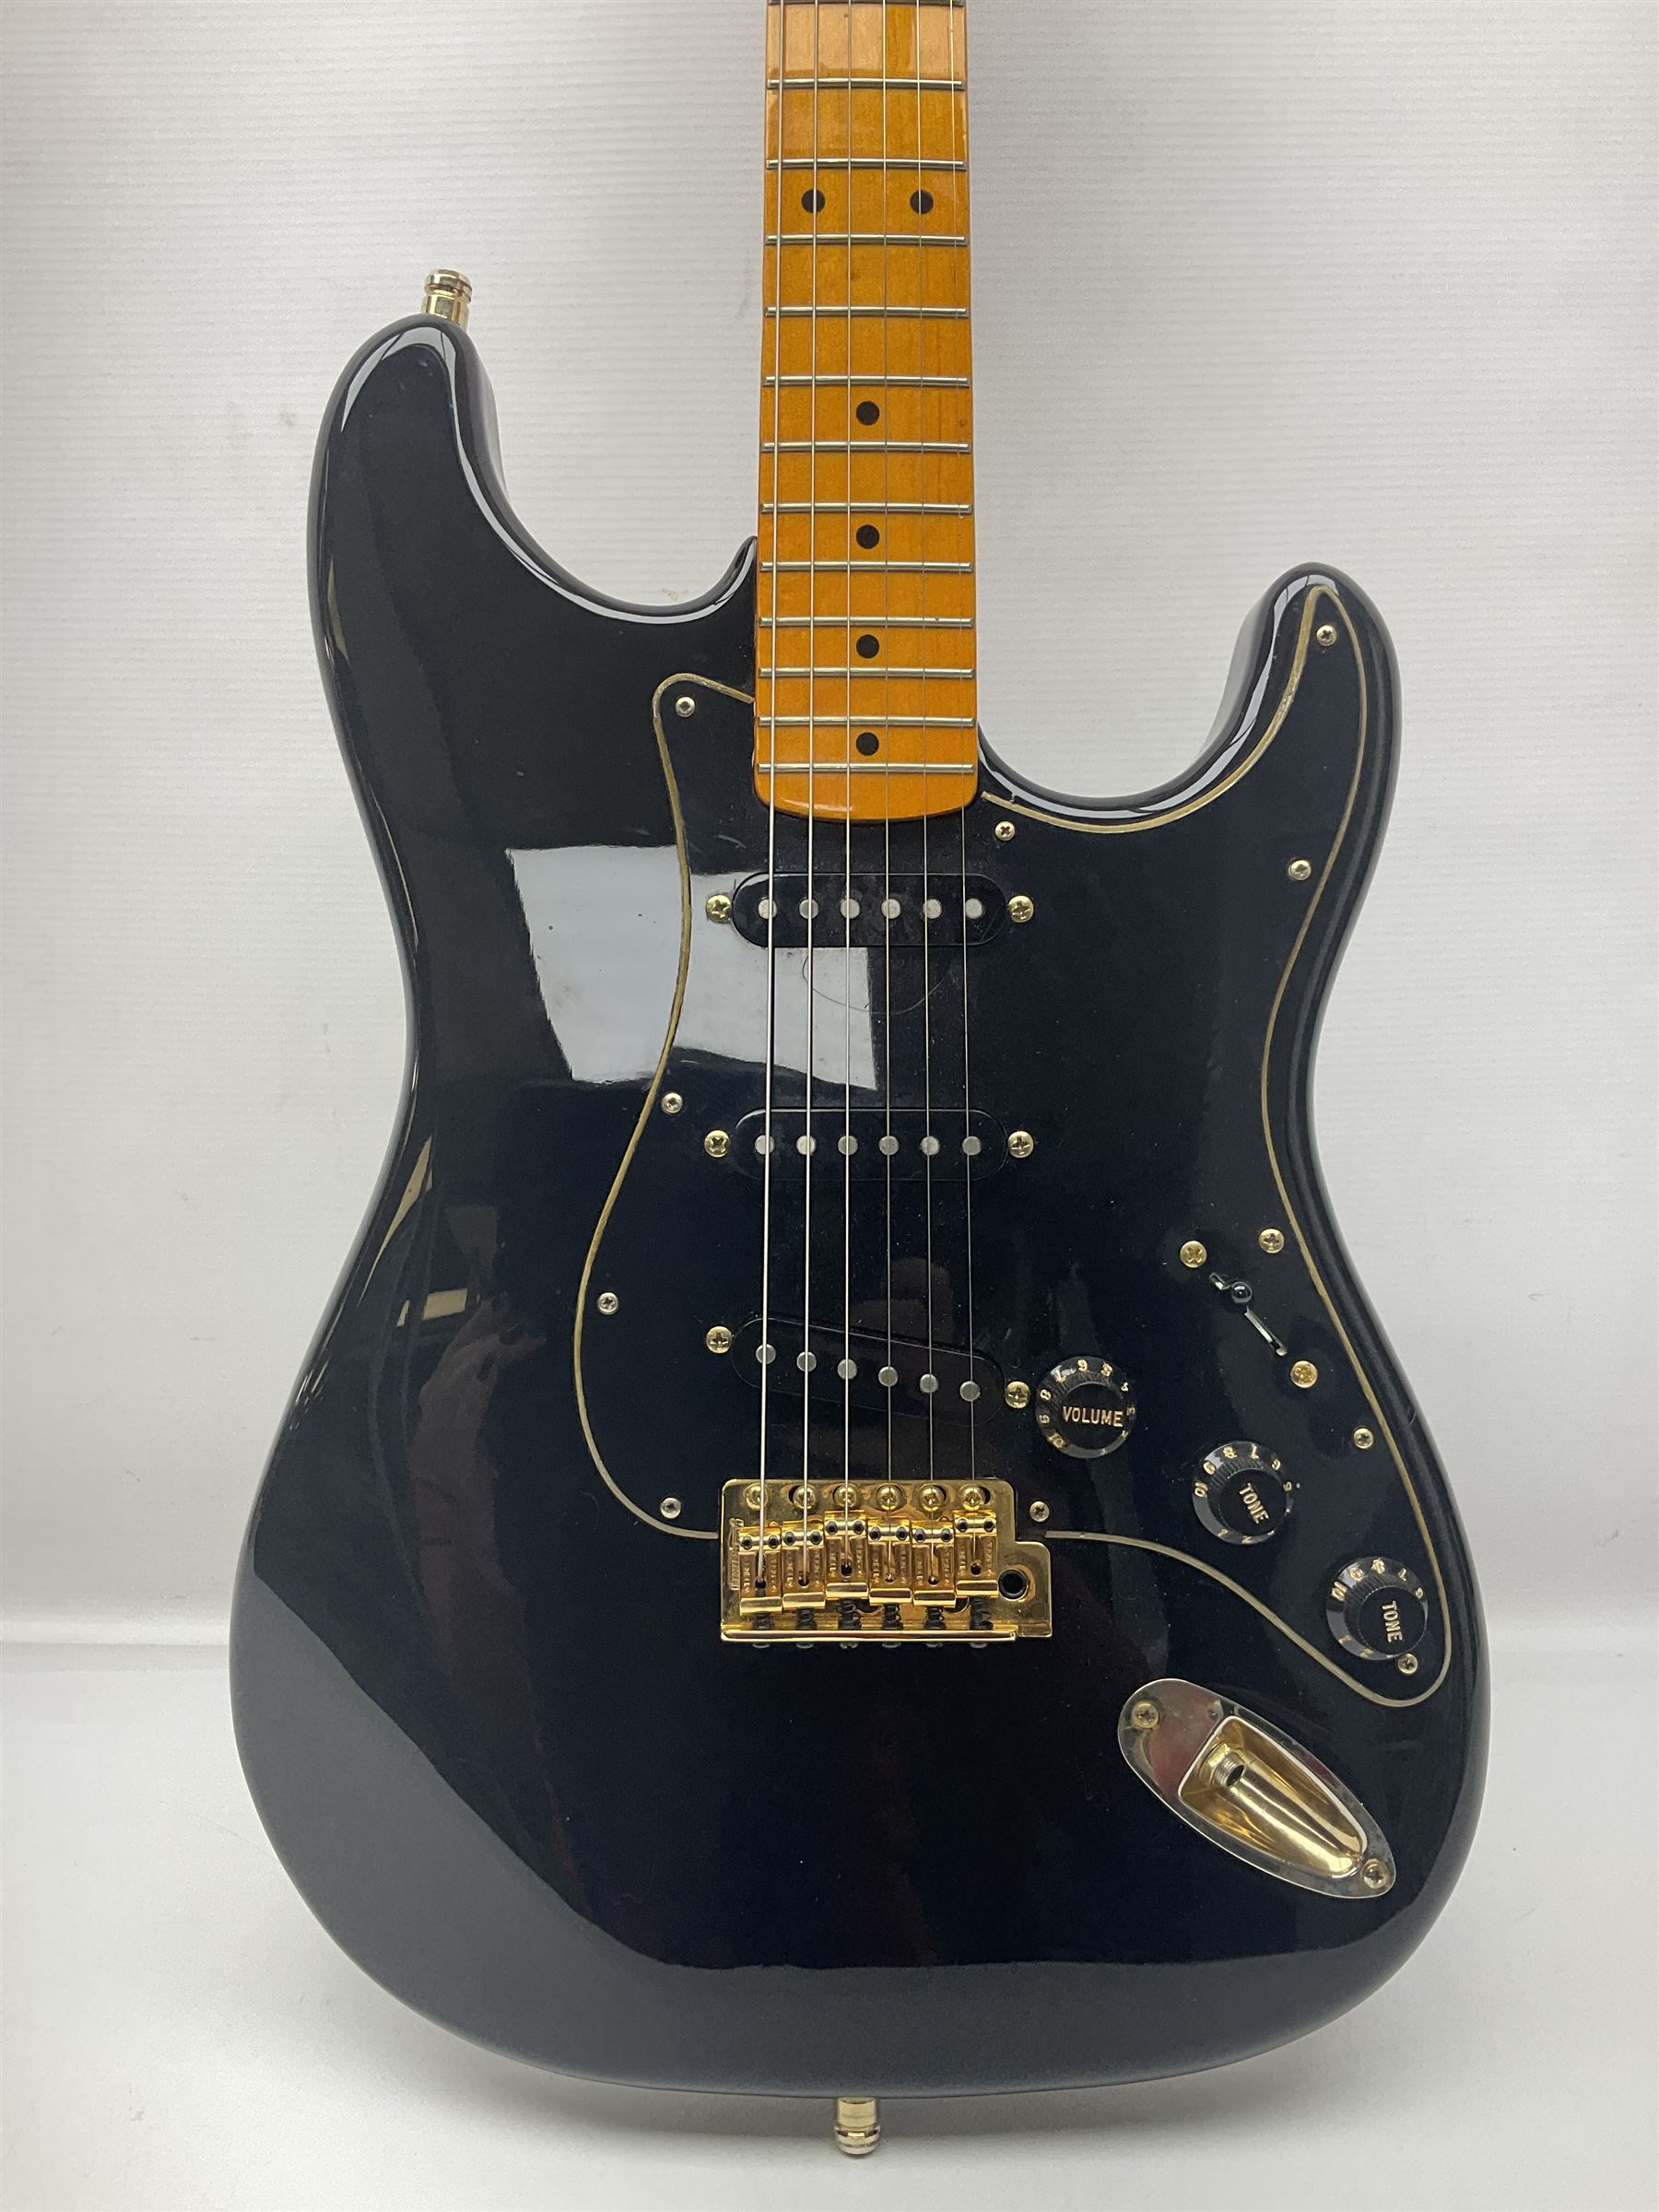 Copy of a Fender Stratocaster electric guitar in black with Wilkinson bridge - Image 2 of 21